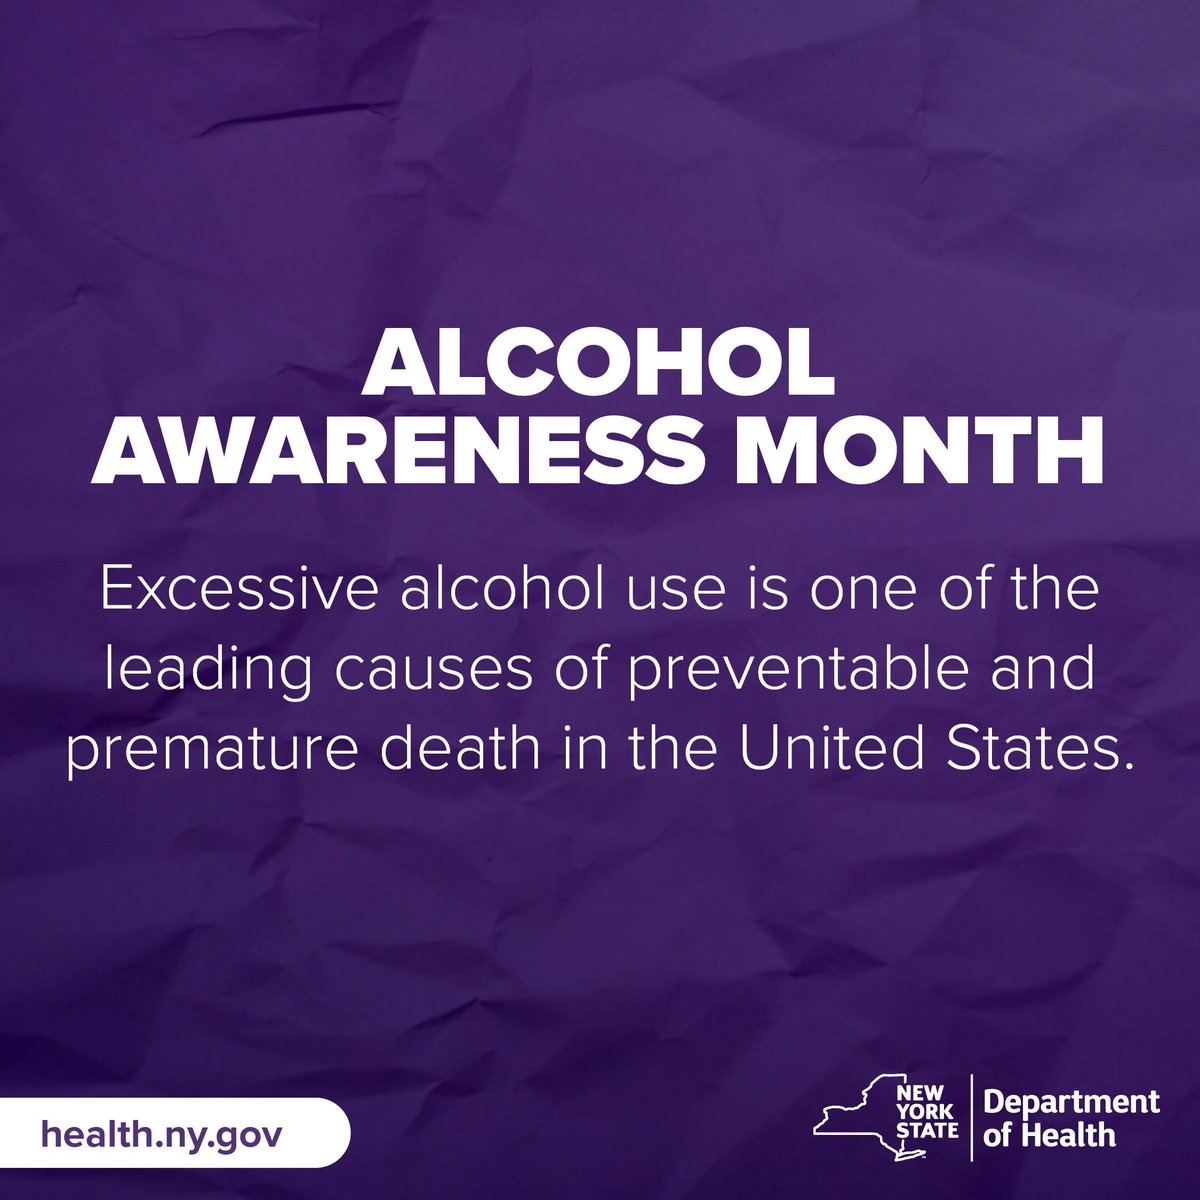 Binge and heavy drinking lead to thousands of premature deaths in New York every year. The Department remains committed to providing resources & support to people who struggle with alcohol use and raising awareness about the dangers of alcohol consumption. health.ny.gov/press/releases…